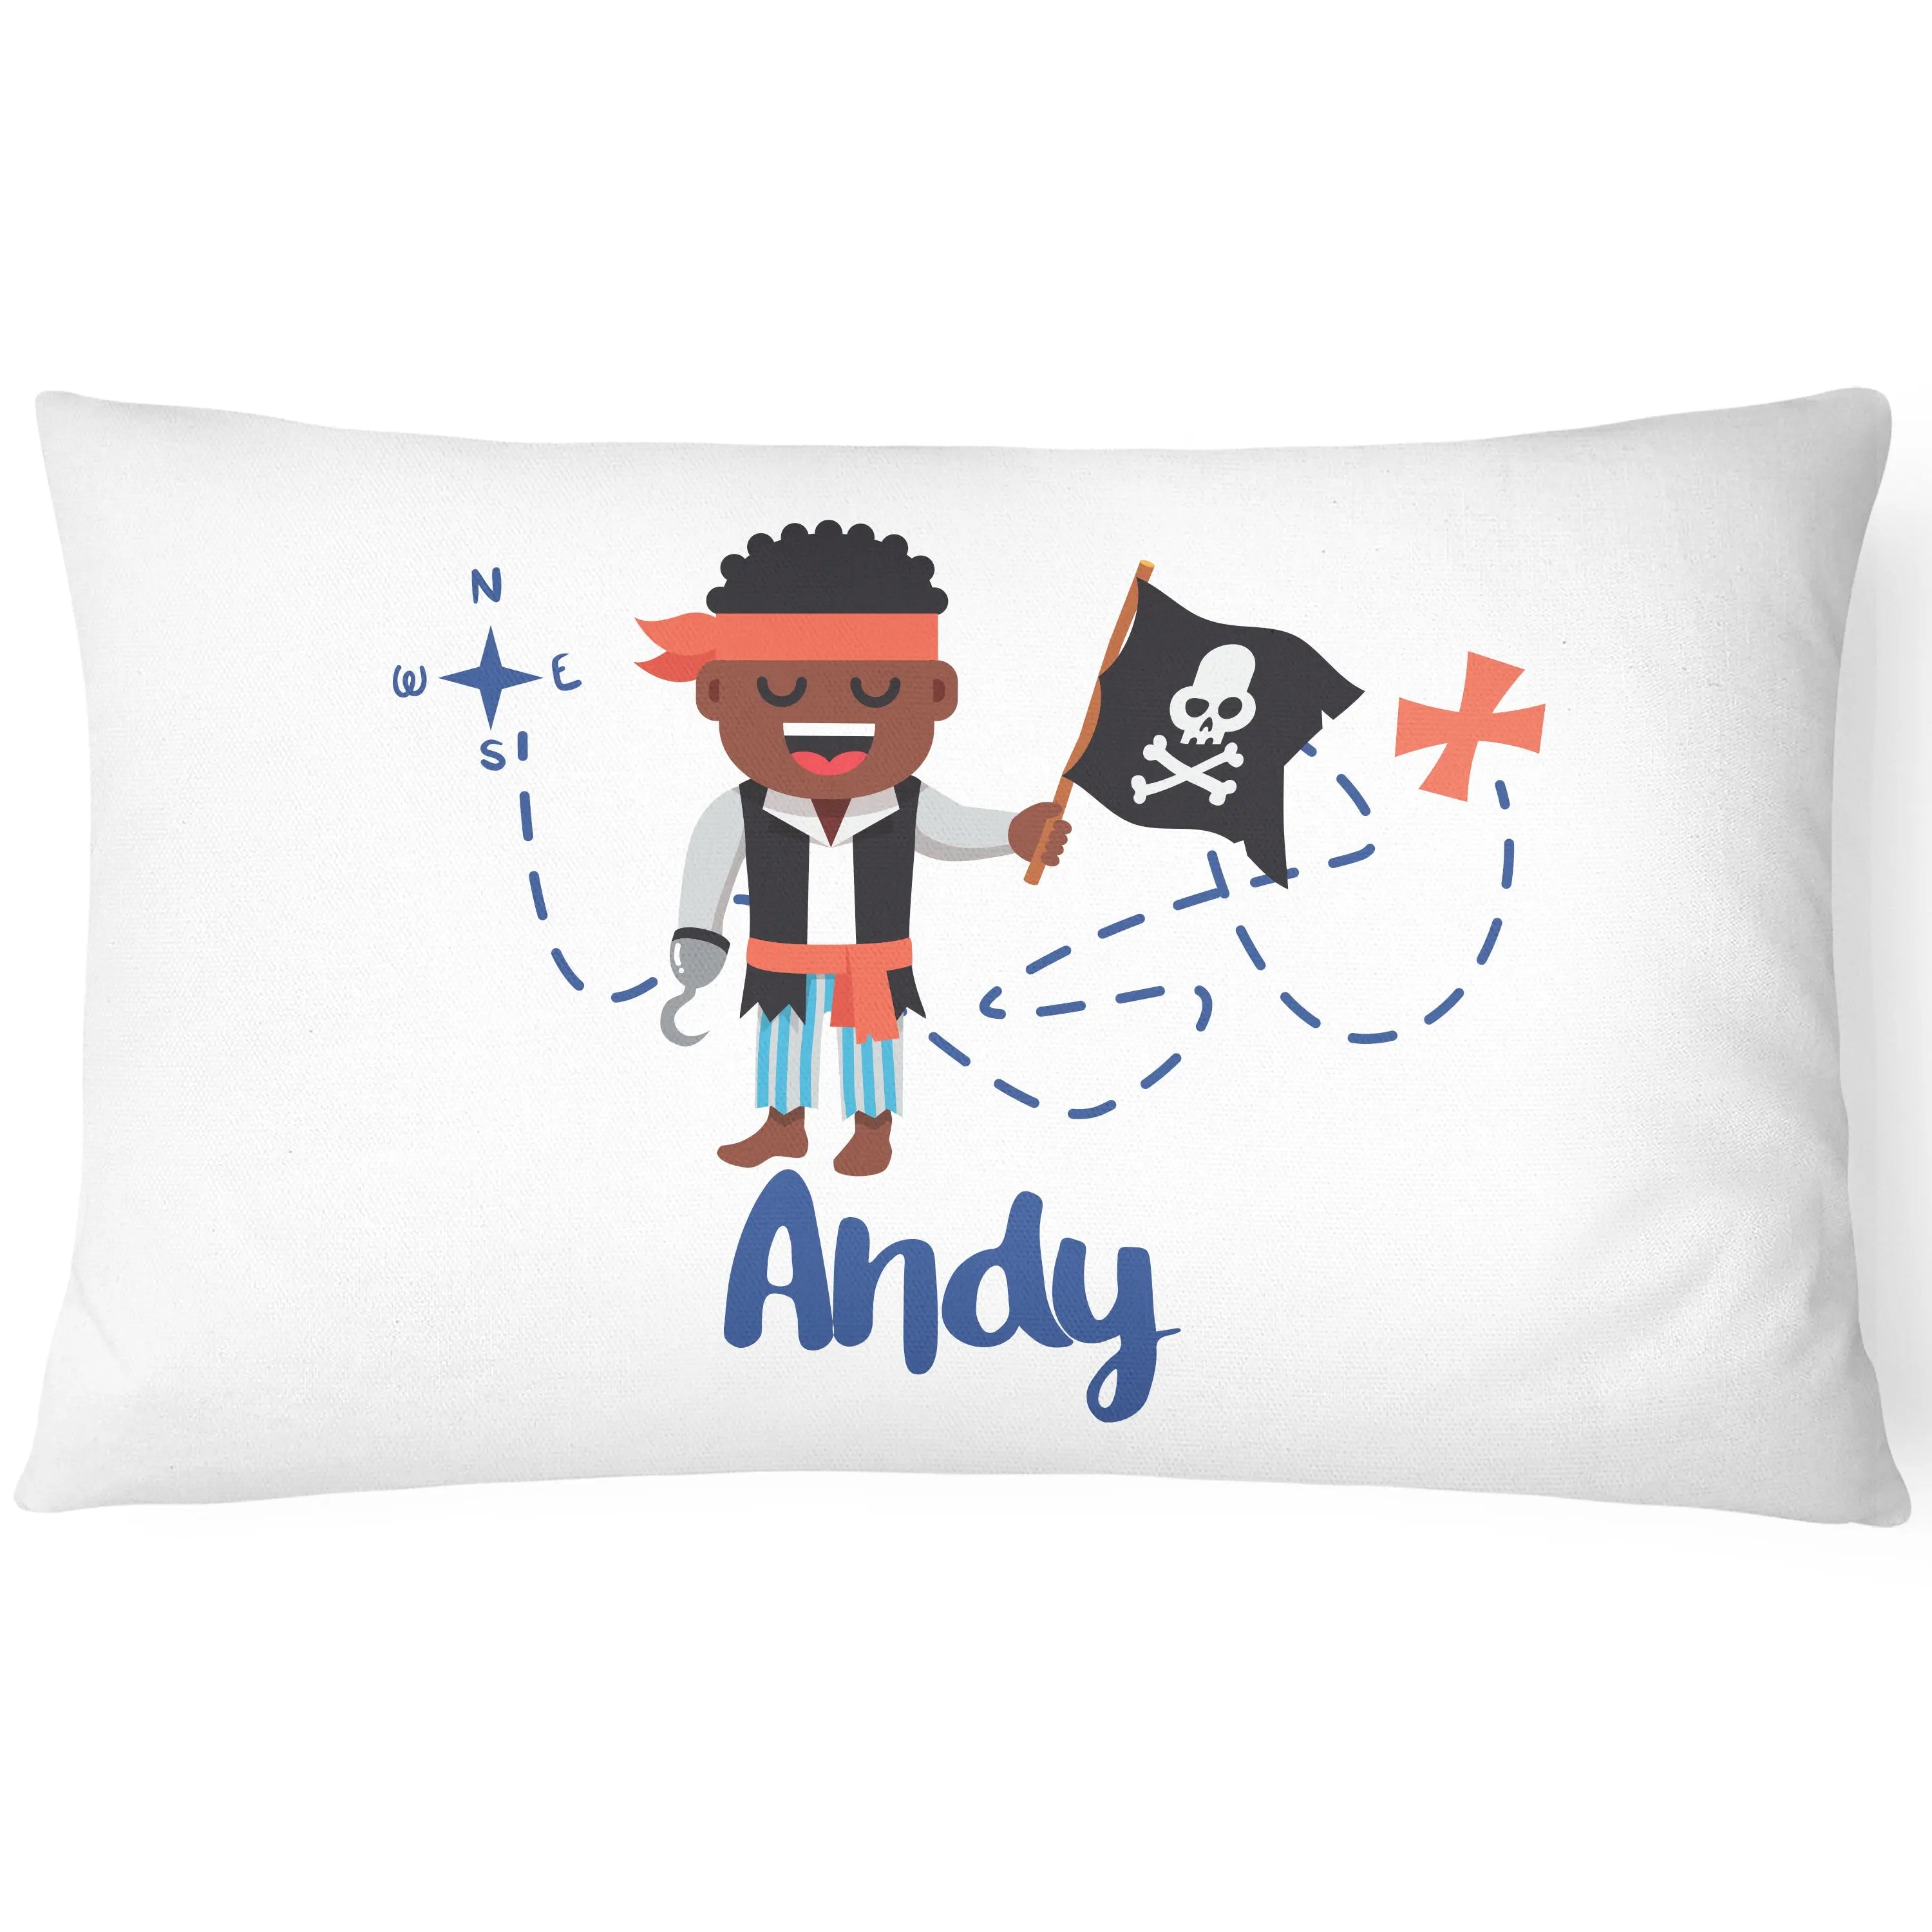 Pirate Pillowcase for Kids - Personalise With Any Name - Perfect Children's Gift - Blue - CushionPop